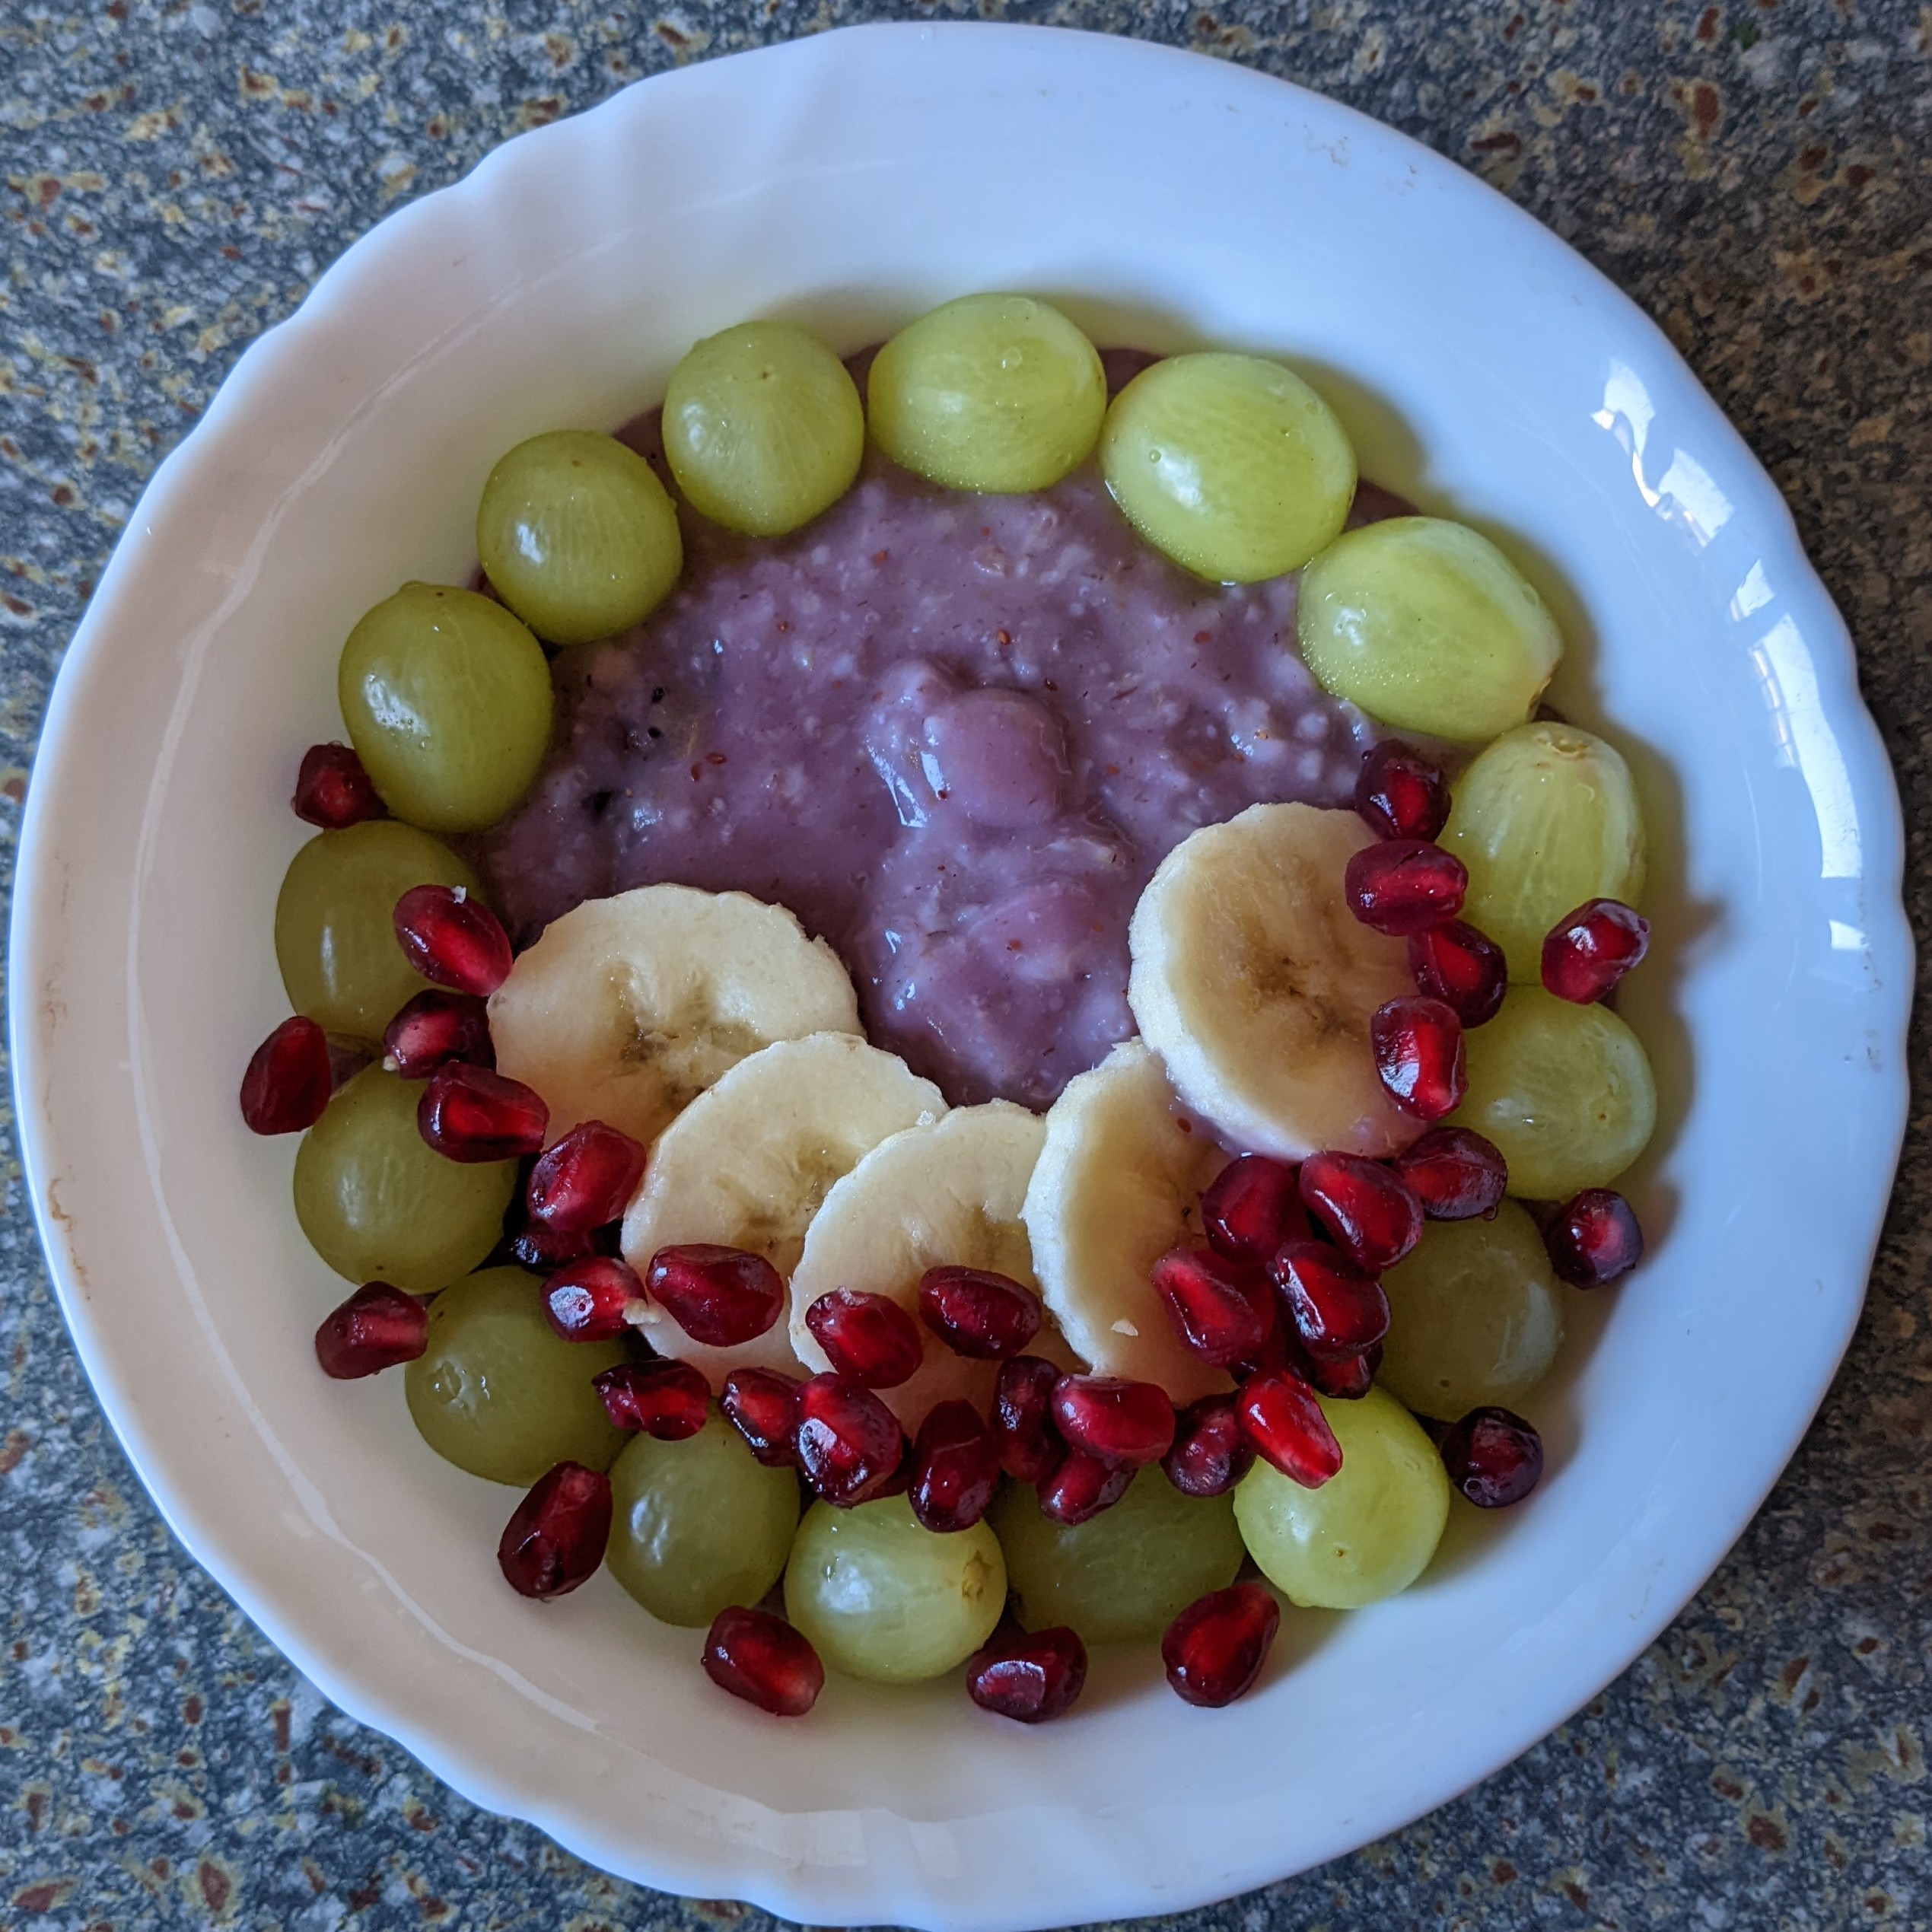 easy-fruity-oats-with-blueberries-banana-grapes-pomegranate-and-chia-seeds-vegan-vegetarian-breakfast-recipes